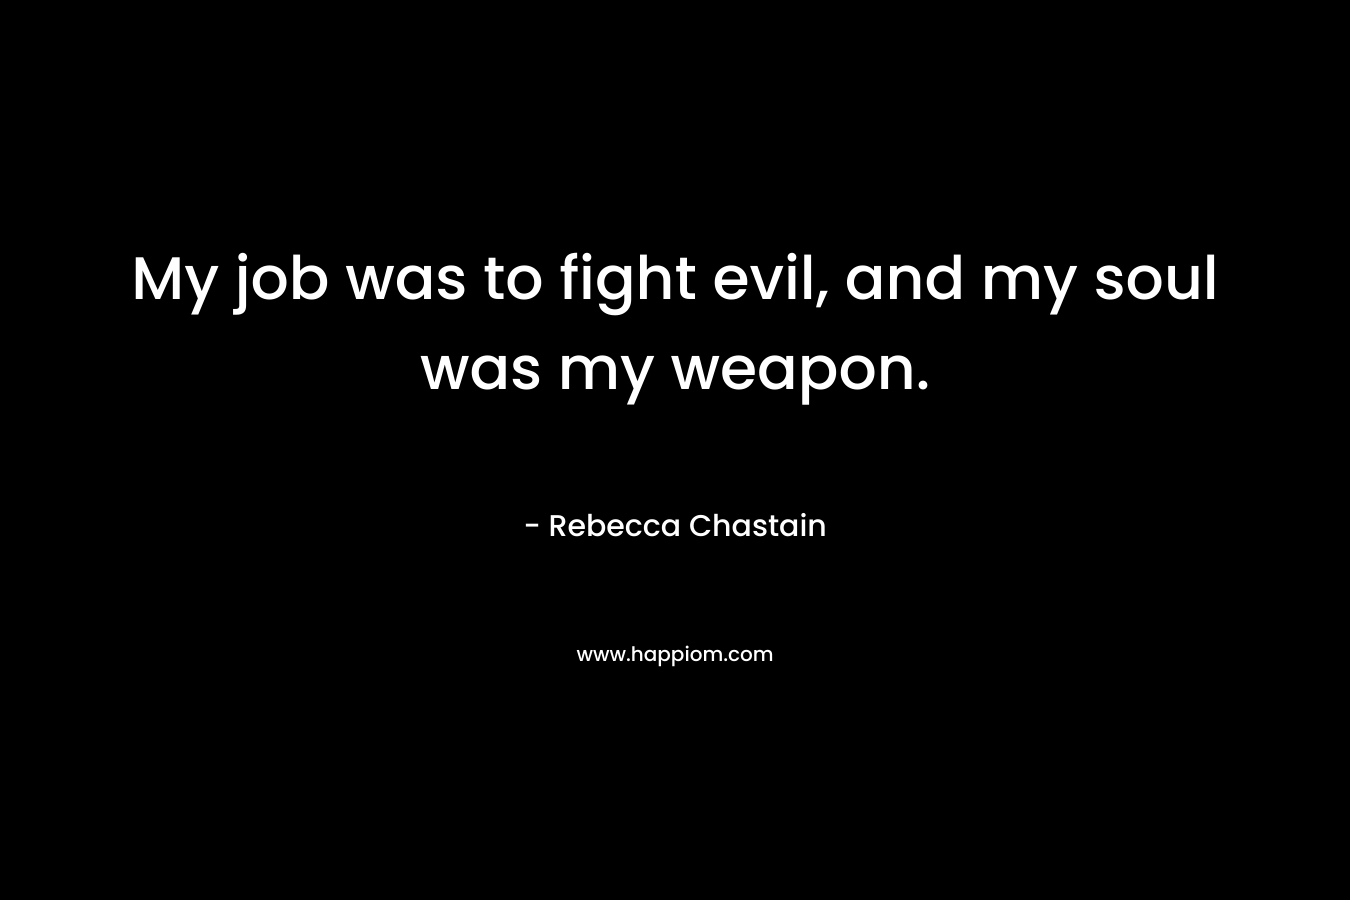 My job was to fight evil, and my soul was my weapon. – Rebecca Chastain